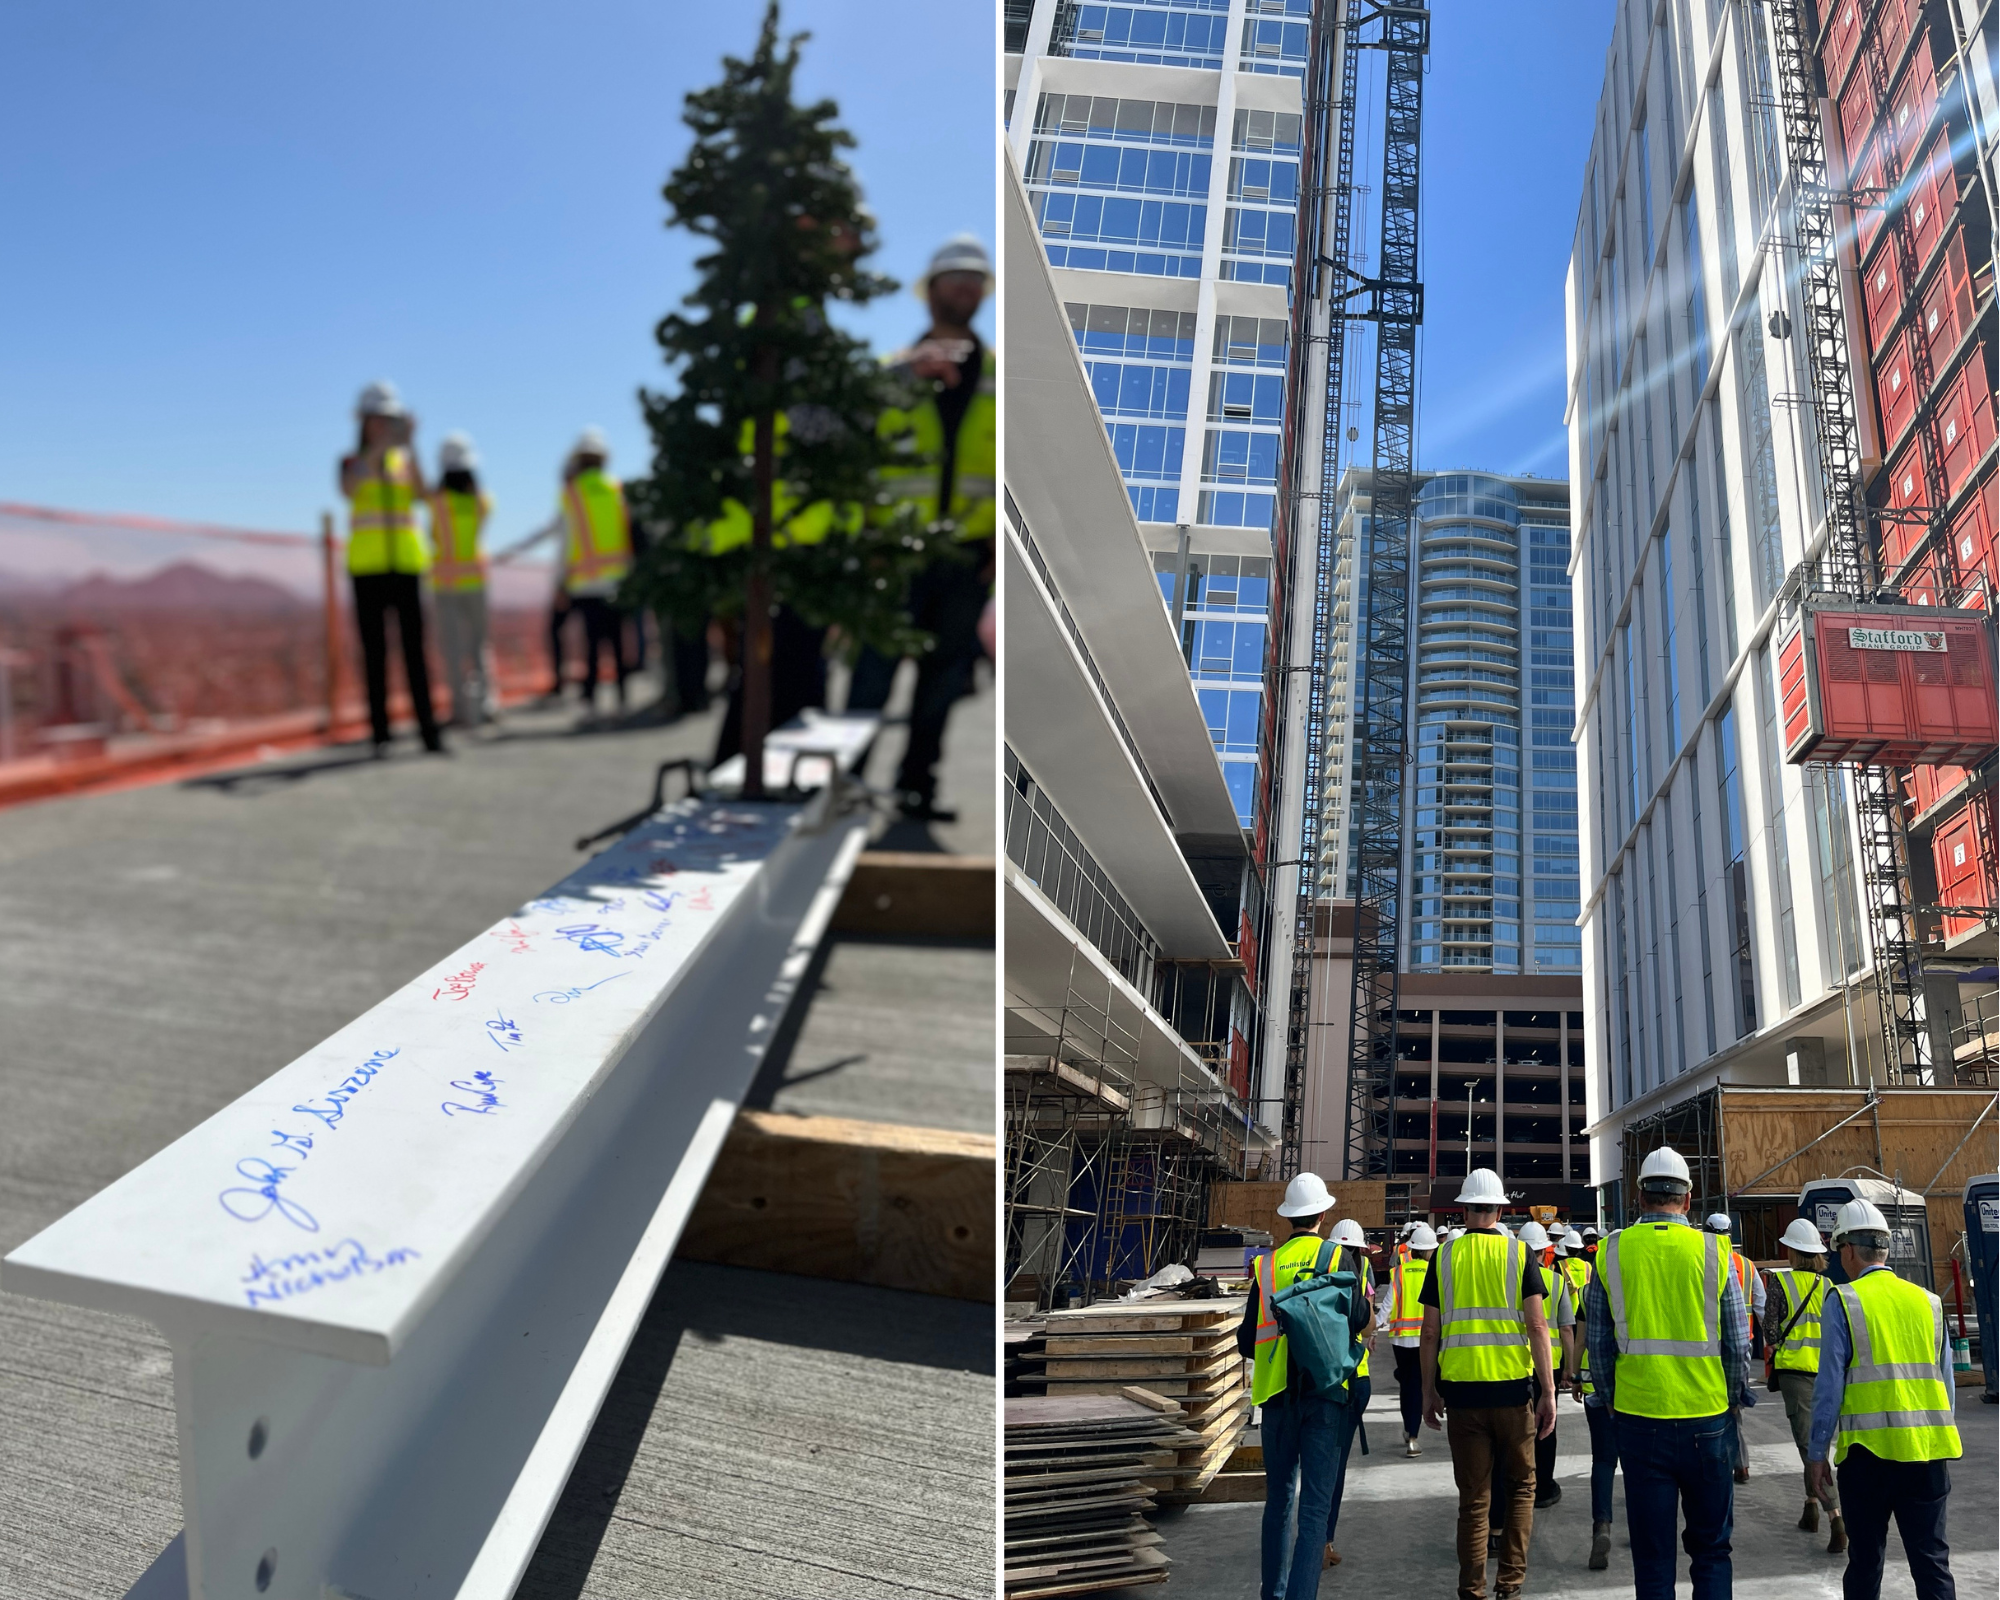 City leaders and project managers signed the last beam of the East Tower structure at Central Station, where they received a tour of the construction site. 